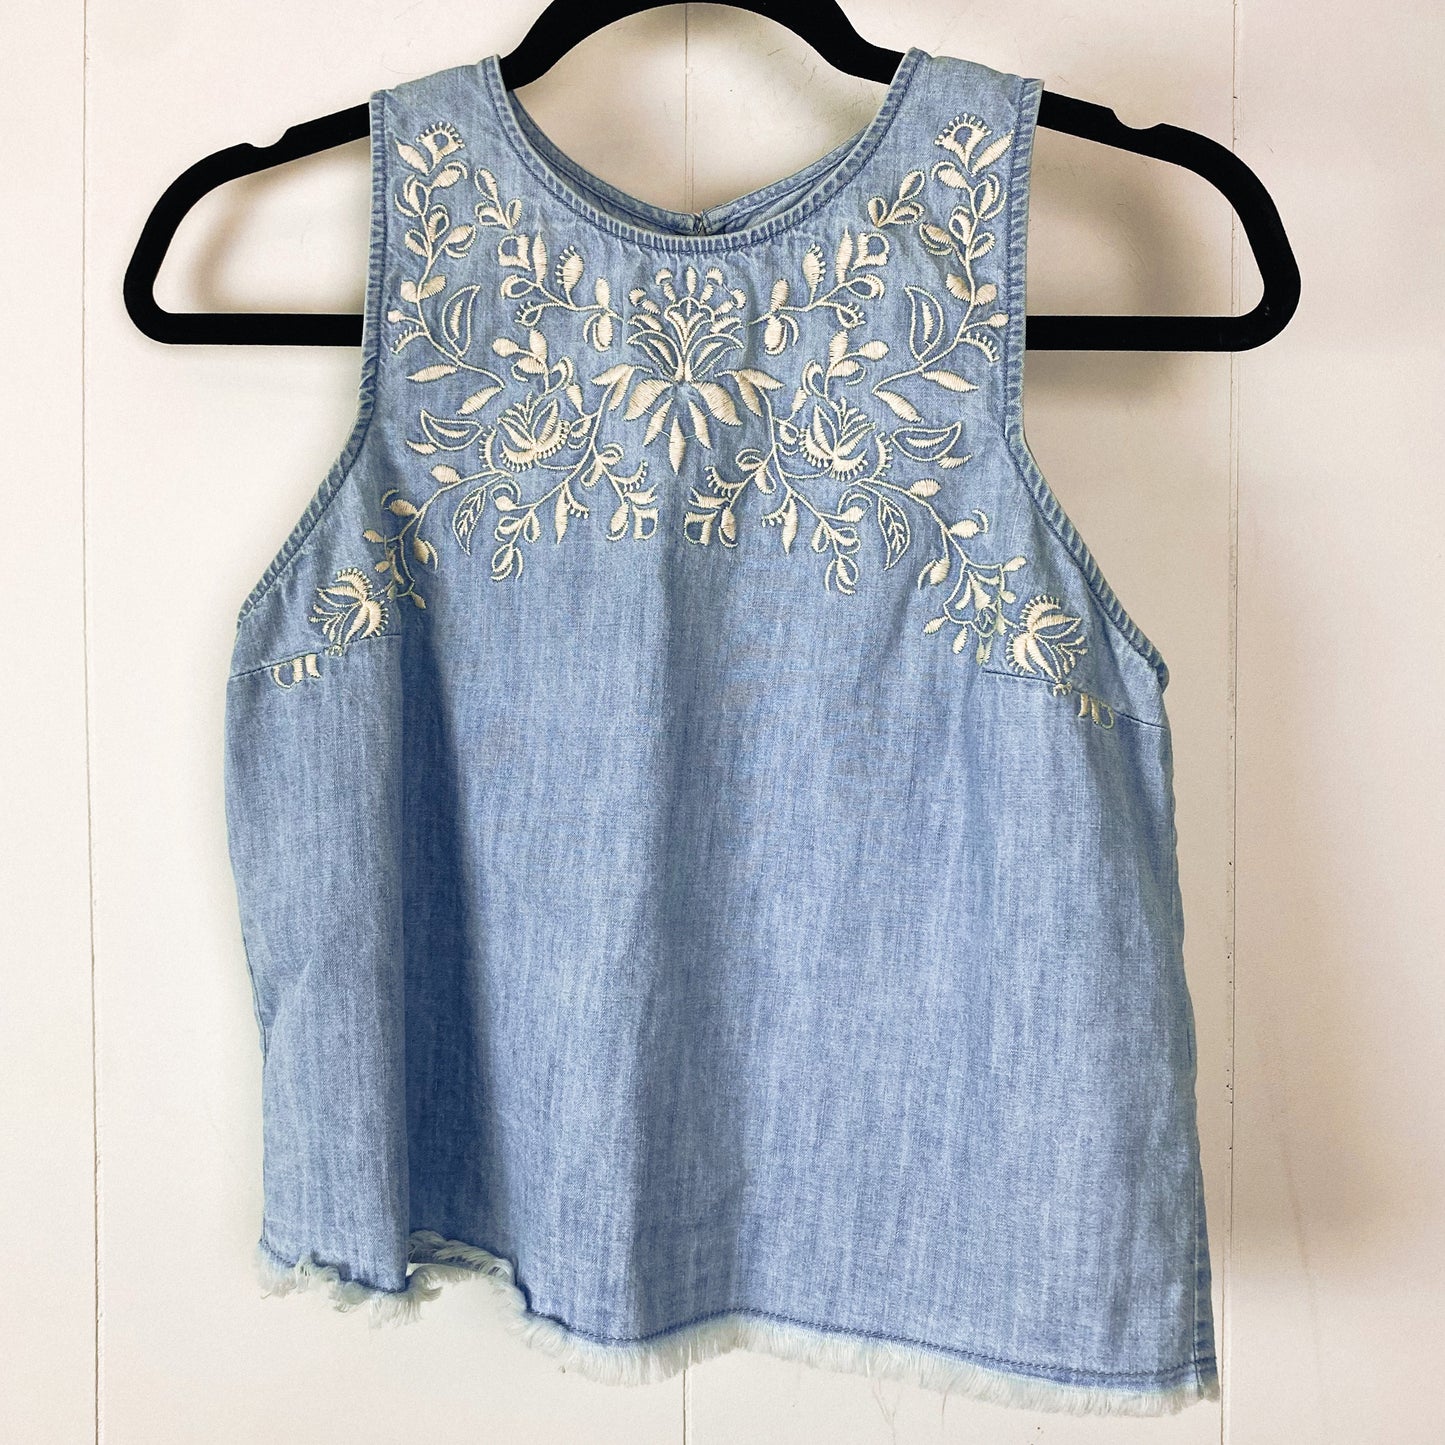 Embroidered Denim Top - S